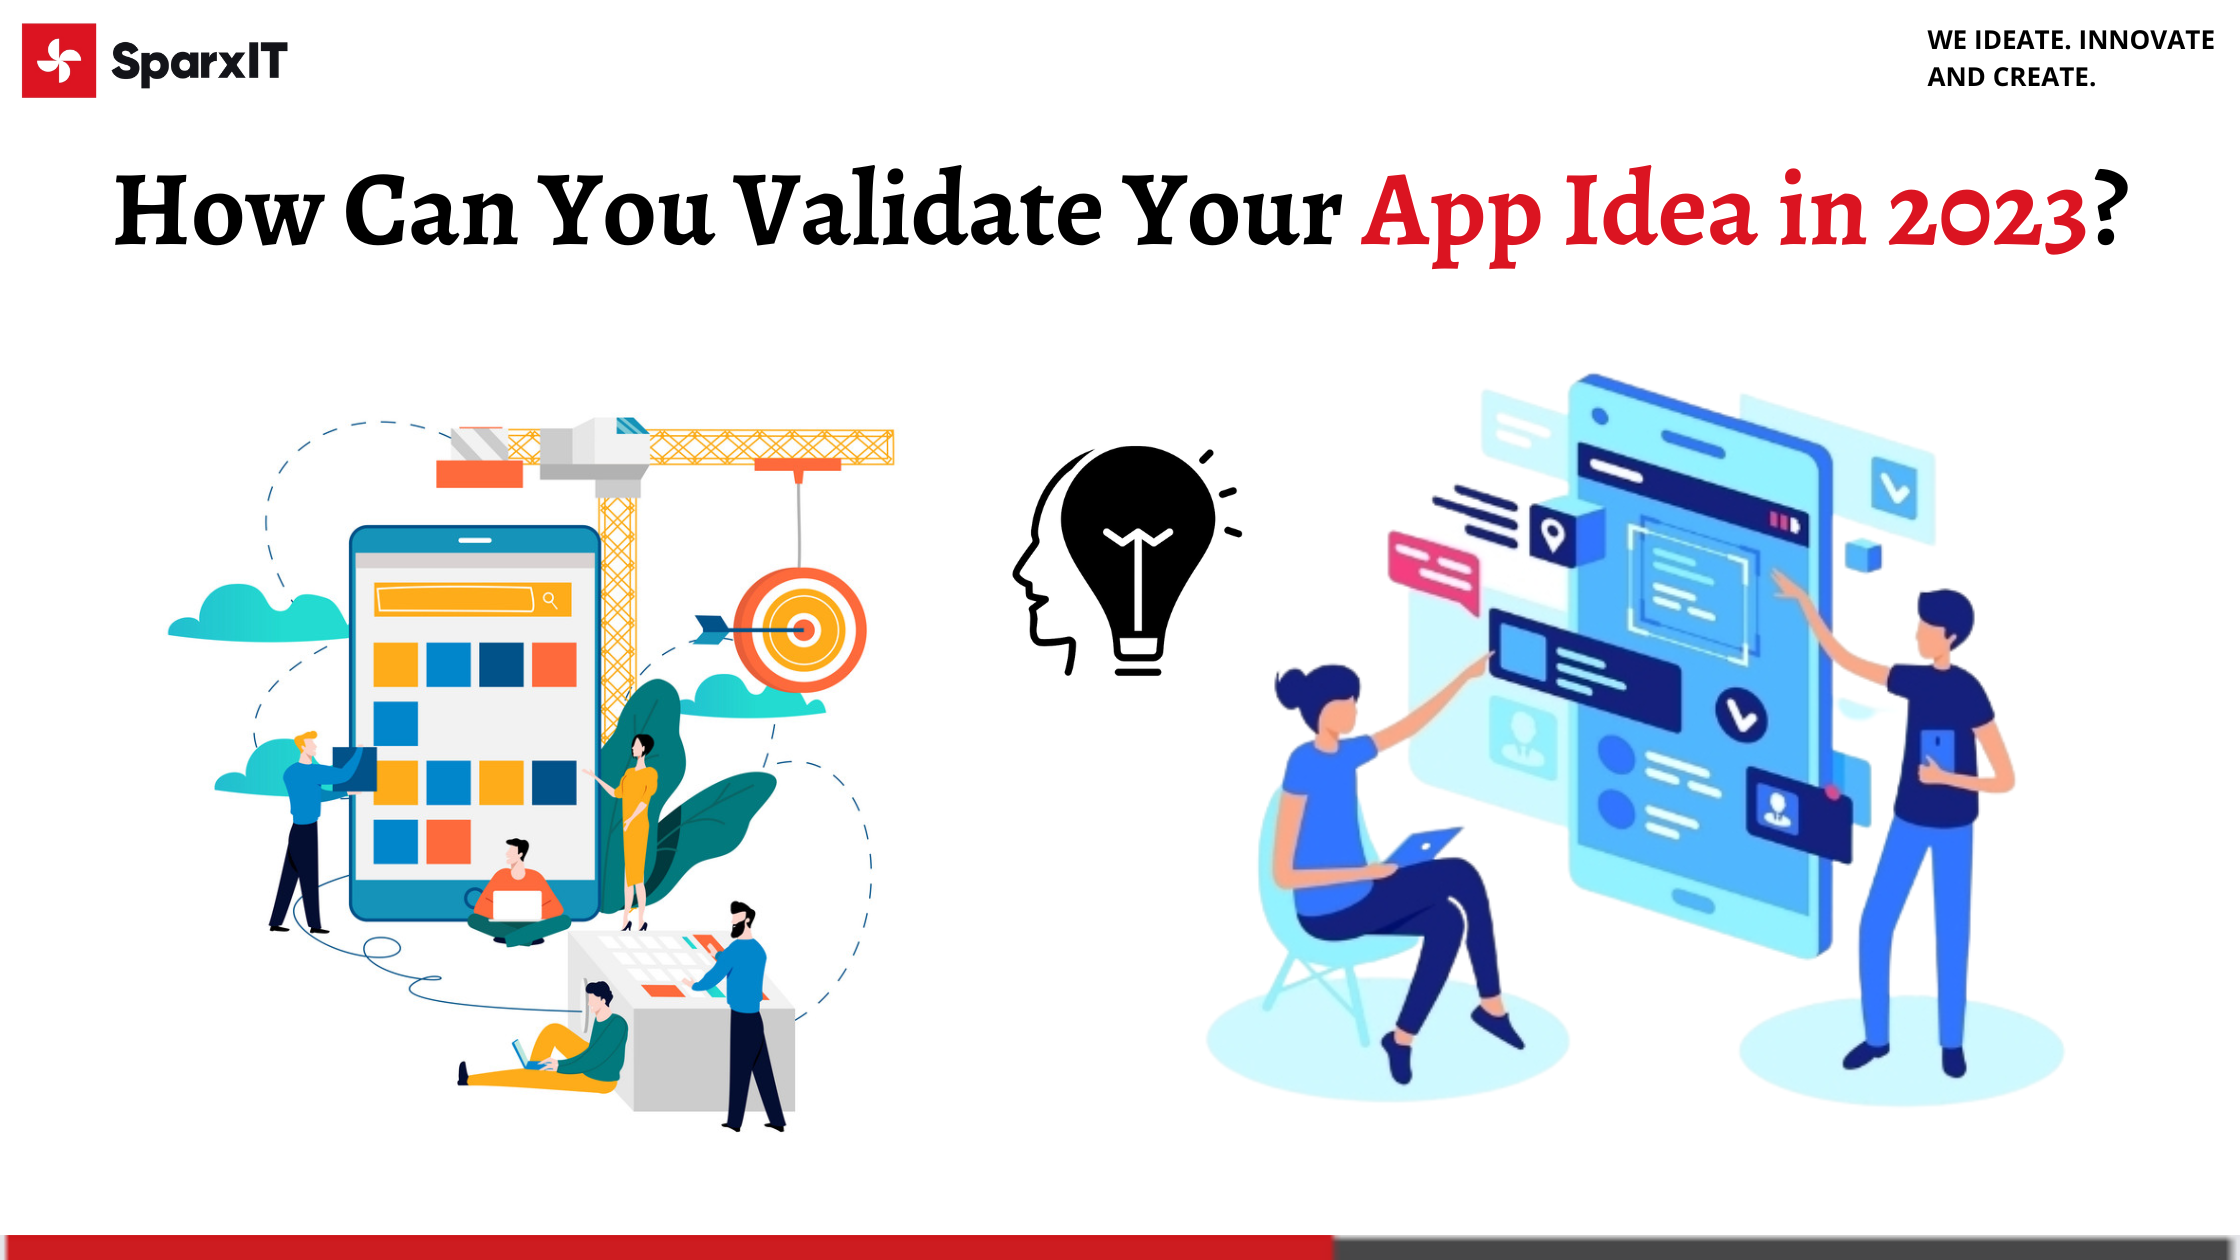 Everything You Need to Know Before Validating Your App Idea in 2023